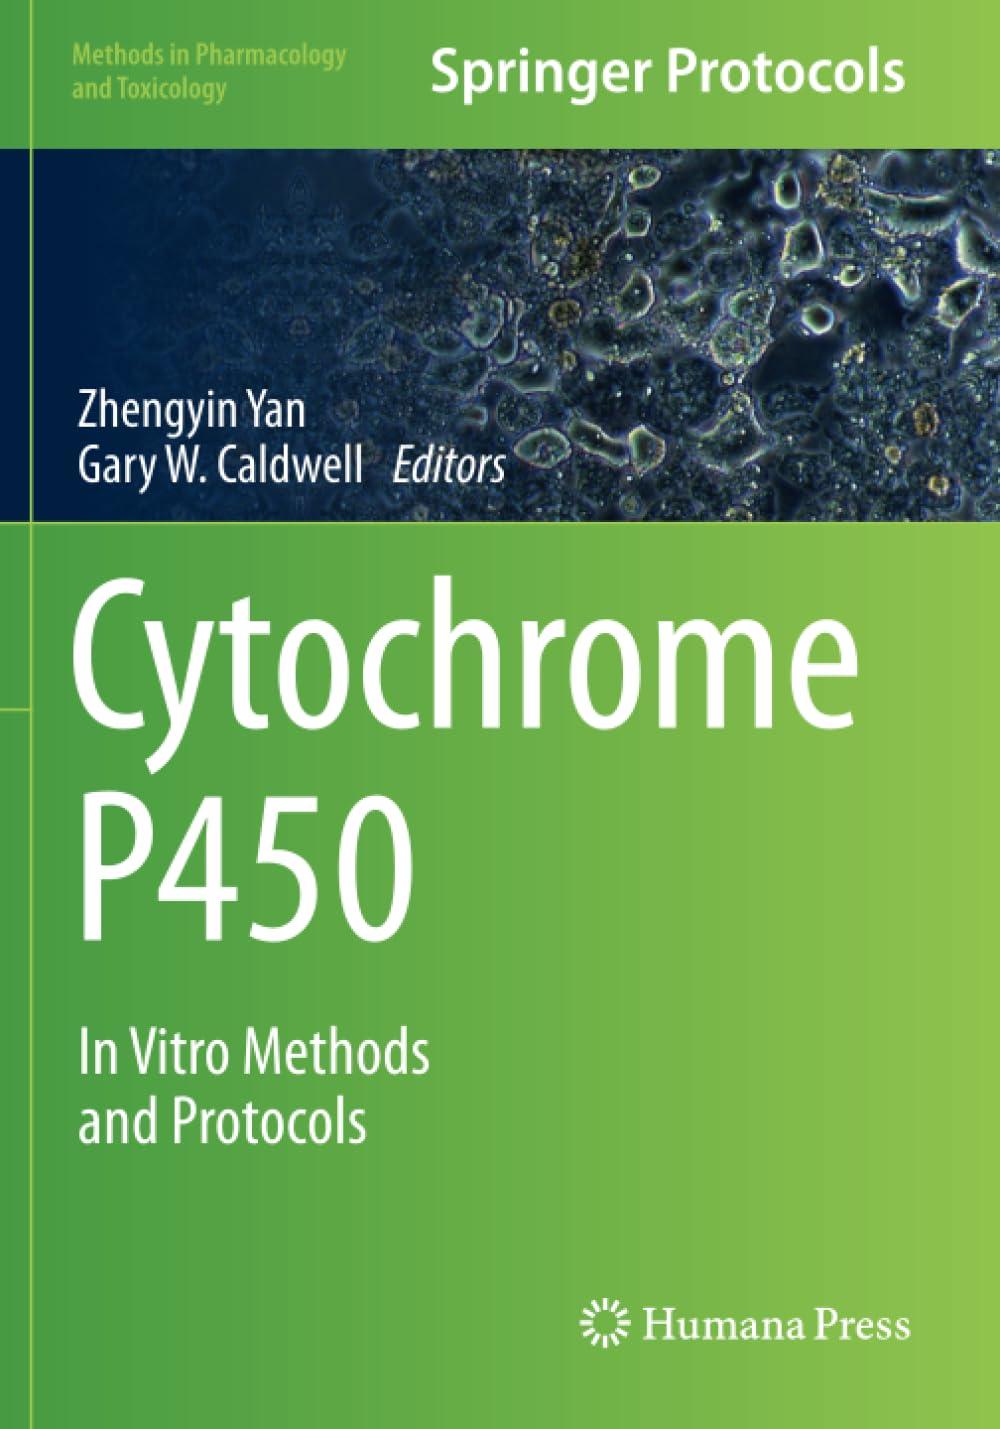 cytochrome p450 in vitro methods and protocols methods in pharmacology and toxicology 1st edition zhengyin